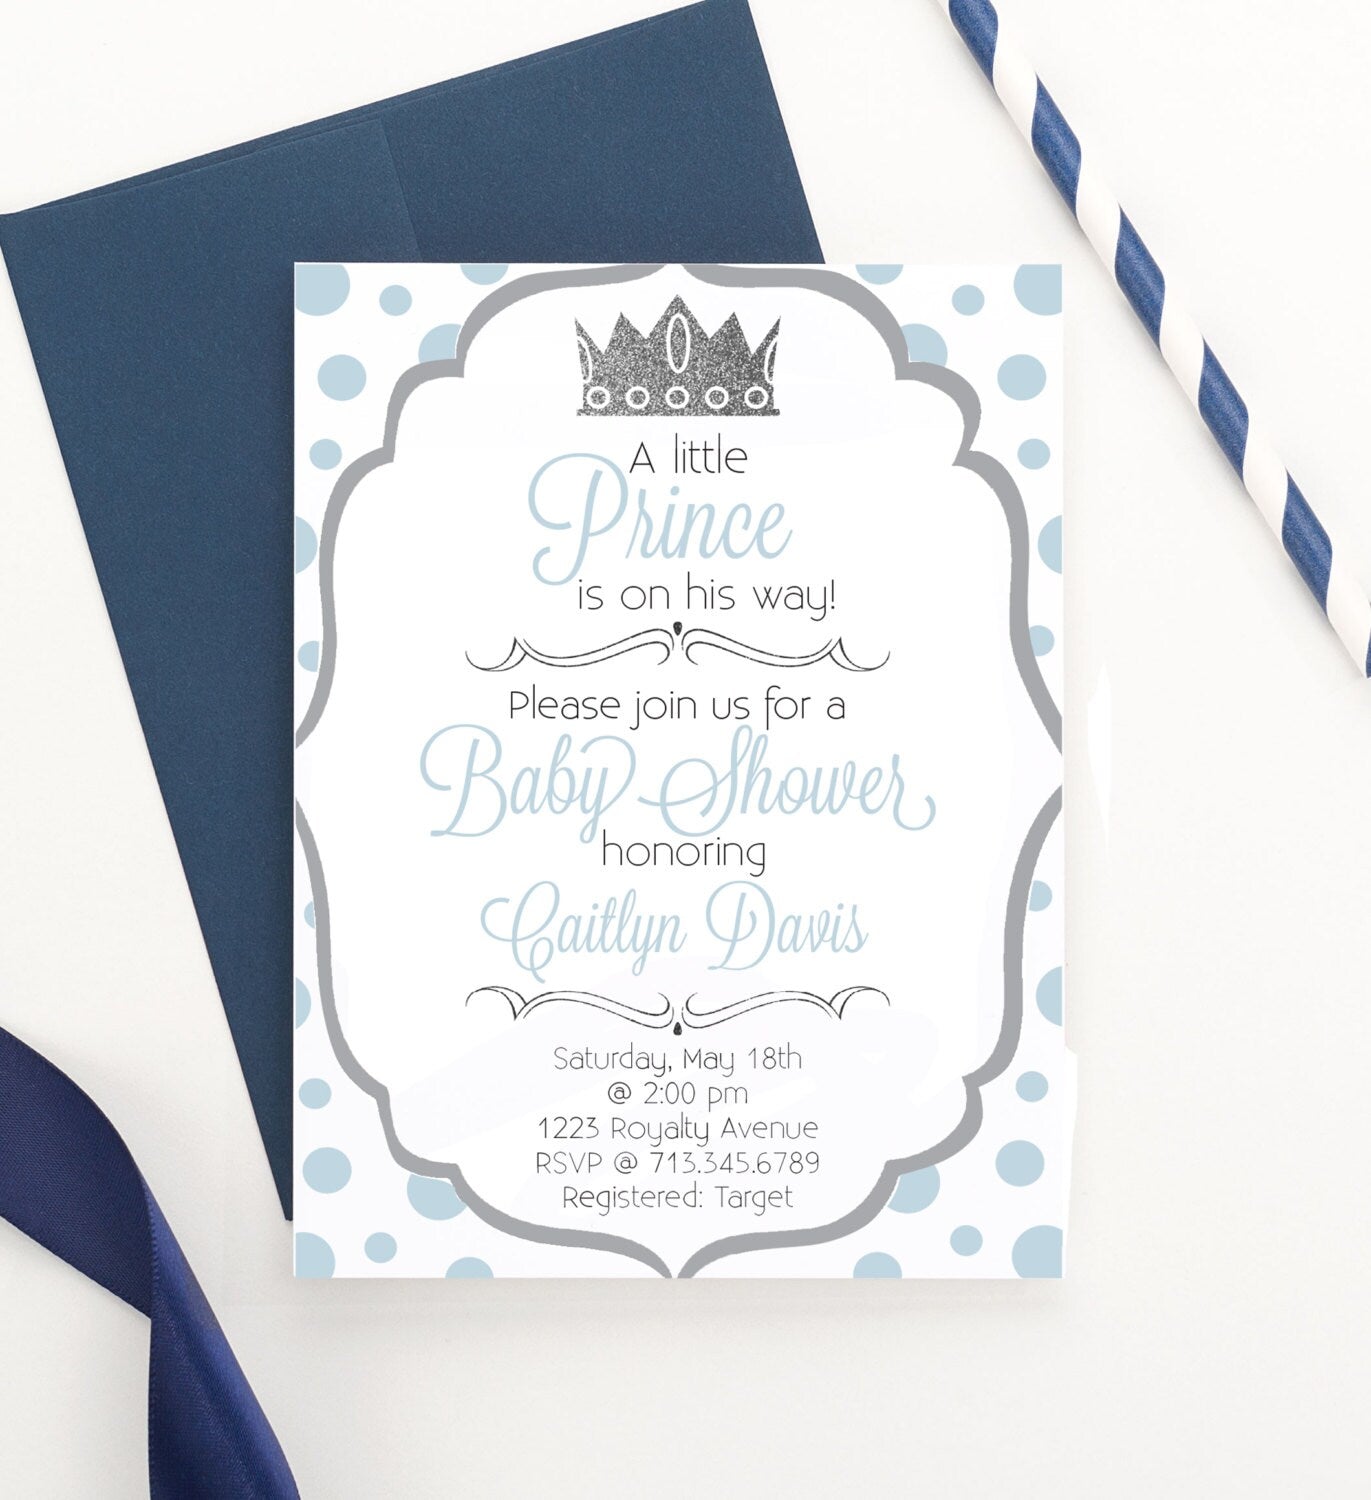 Personalized Blue Prince Baby Shower Invites With Silver Crown